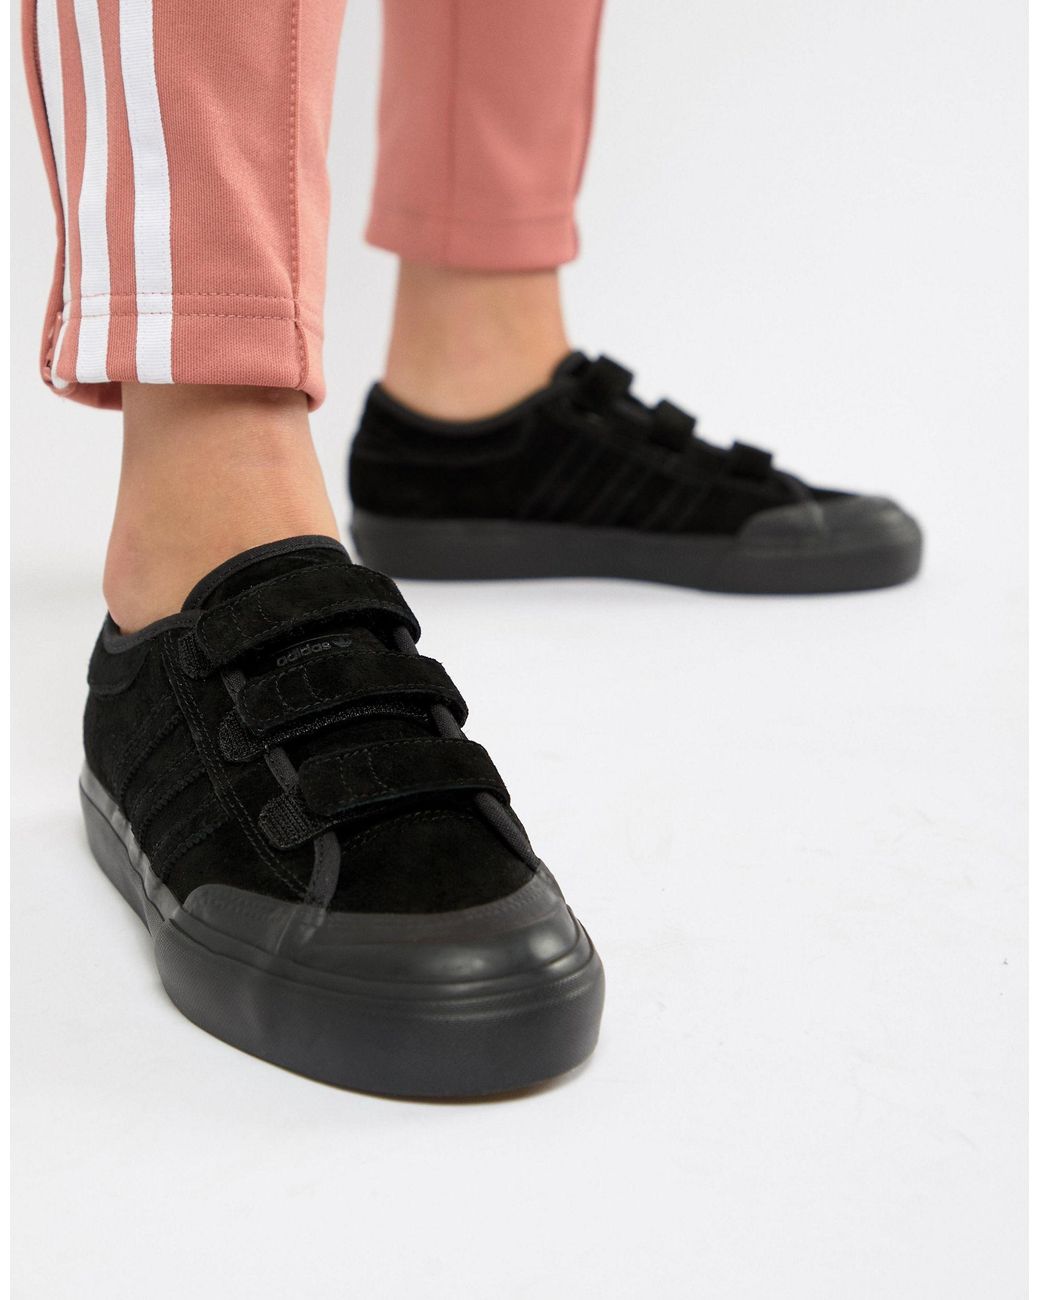 adidas Originals Rubber Adidas Skate Boarding Matchcourt Cf Sneakers With  Straps in Black - Lyst